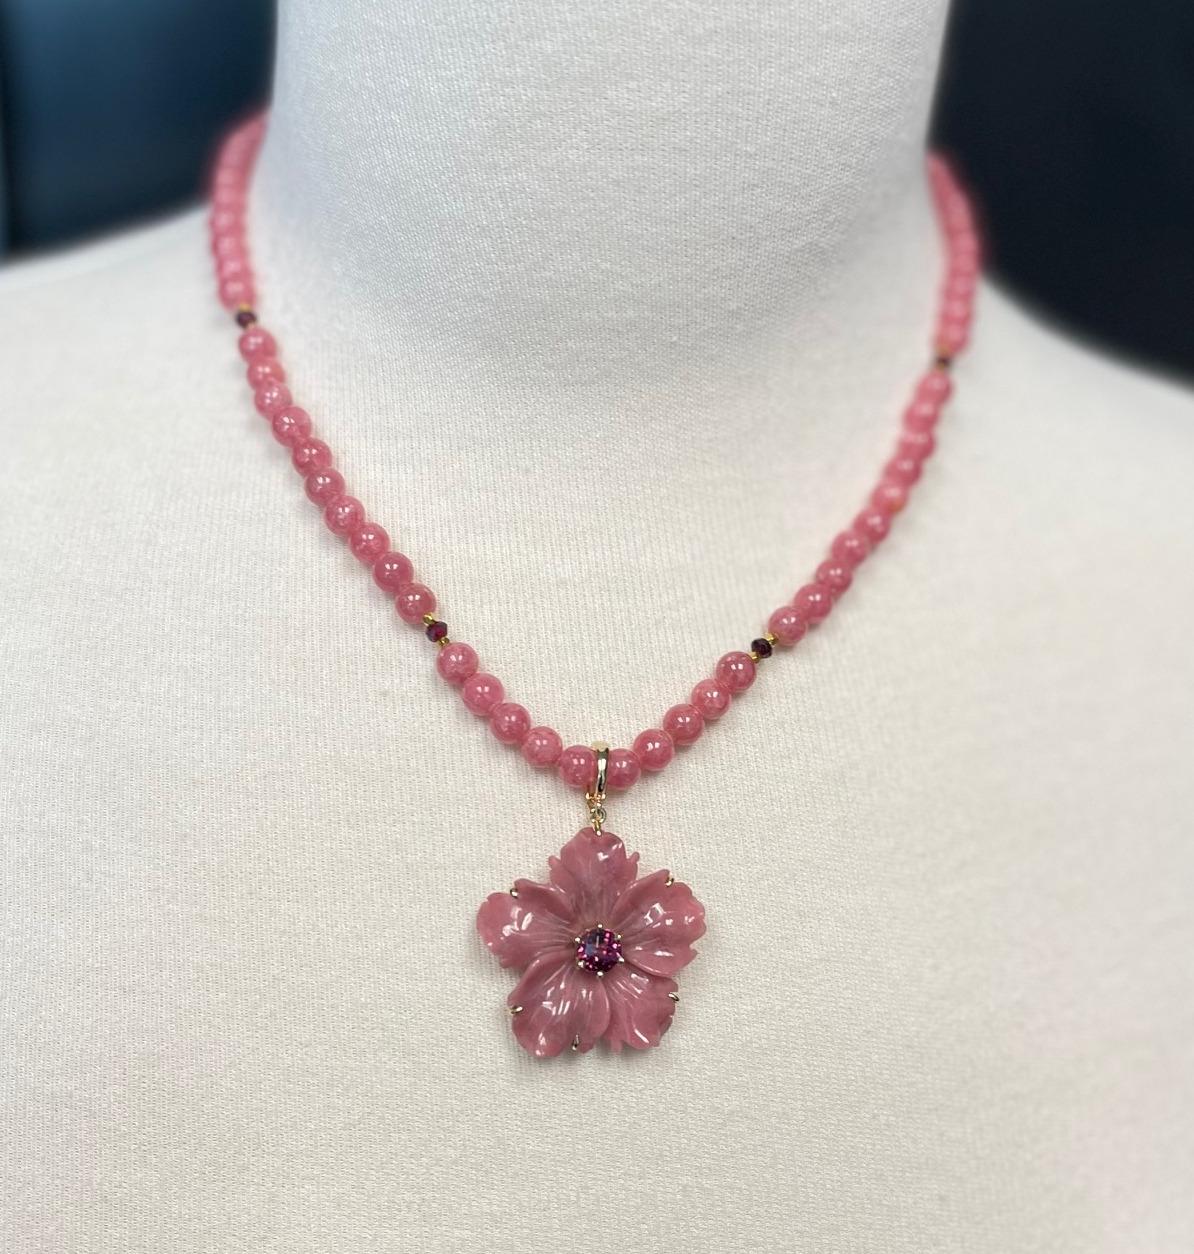  Rhodochrosite Beaded Necklace with Hand Carved Rhodonite Floral Pendant  For Sale 1